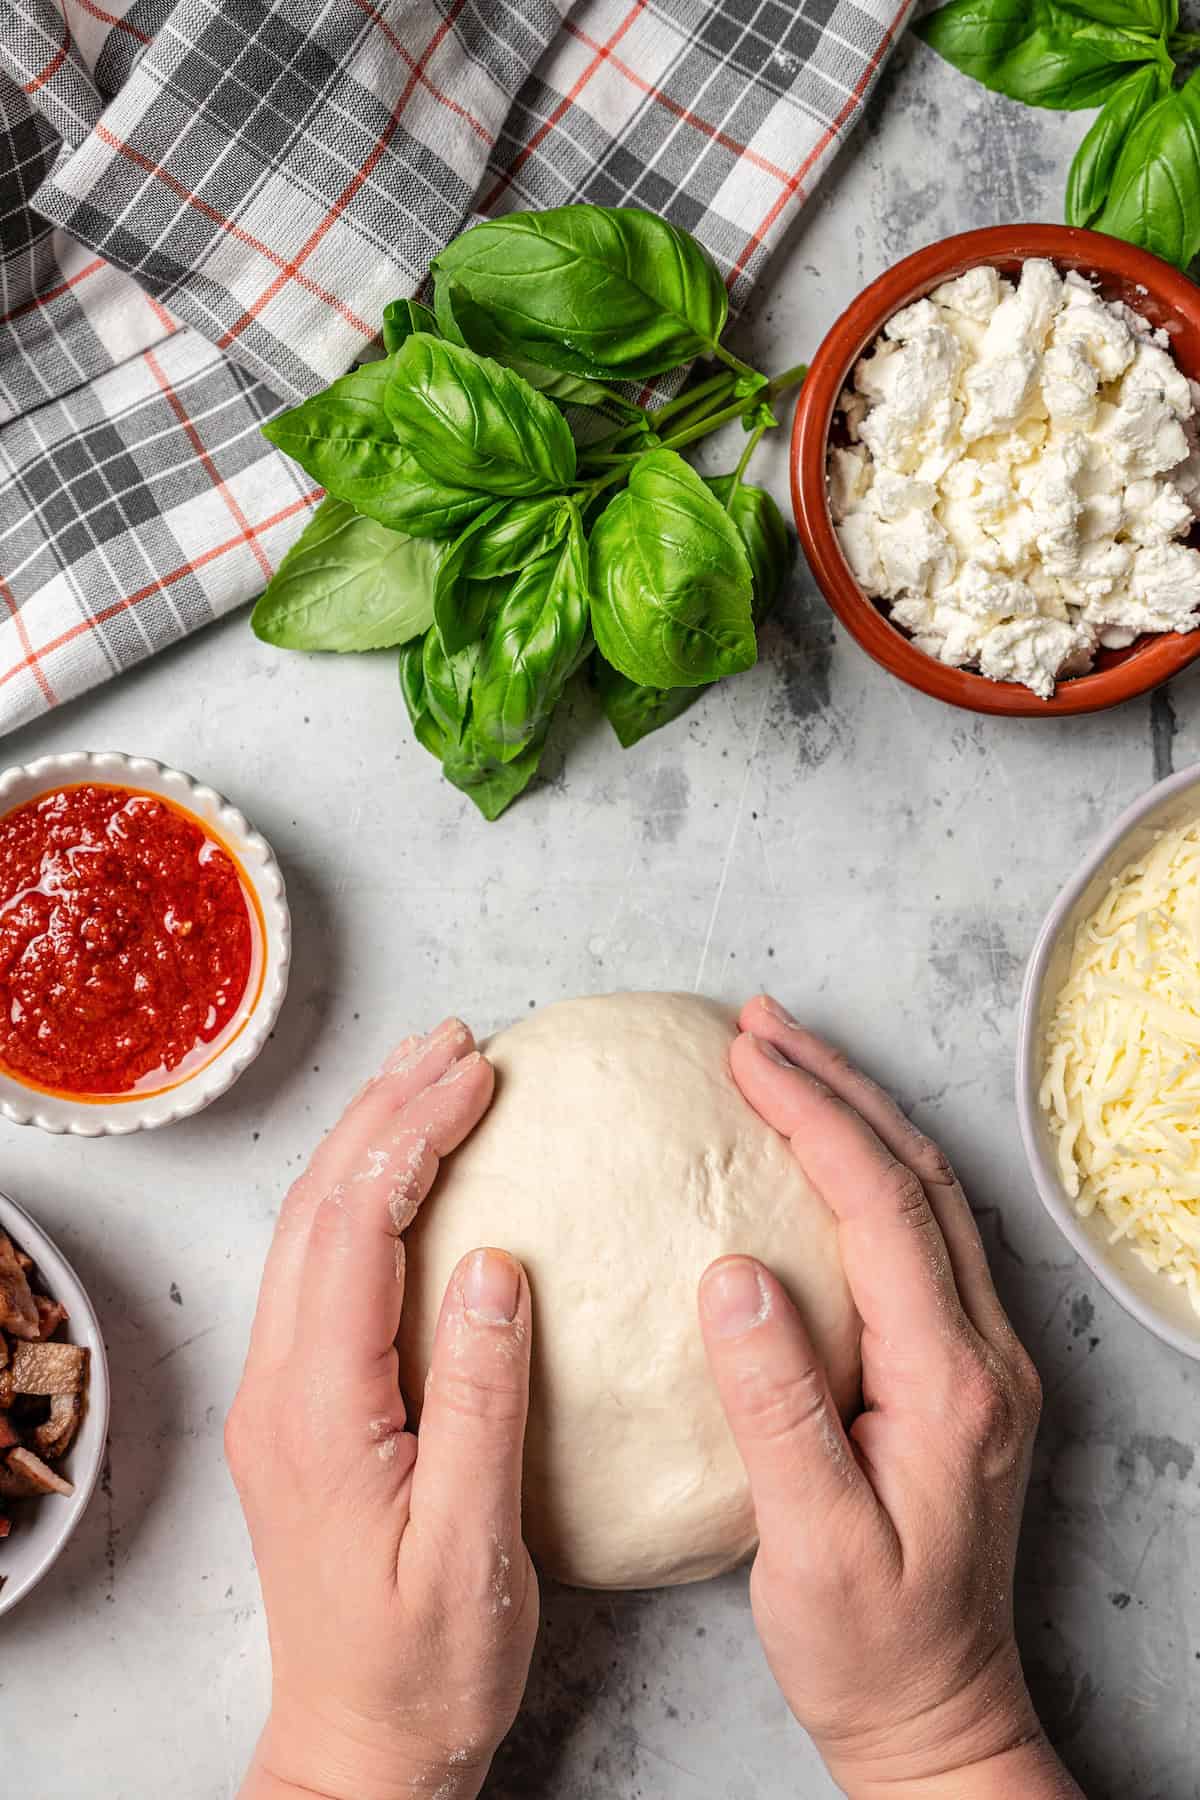 Two hands shaping a ball of pizza dough, surrounded by bowls of pizza toppings.